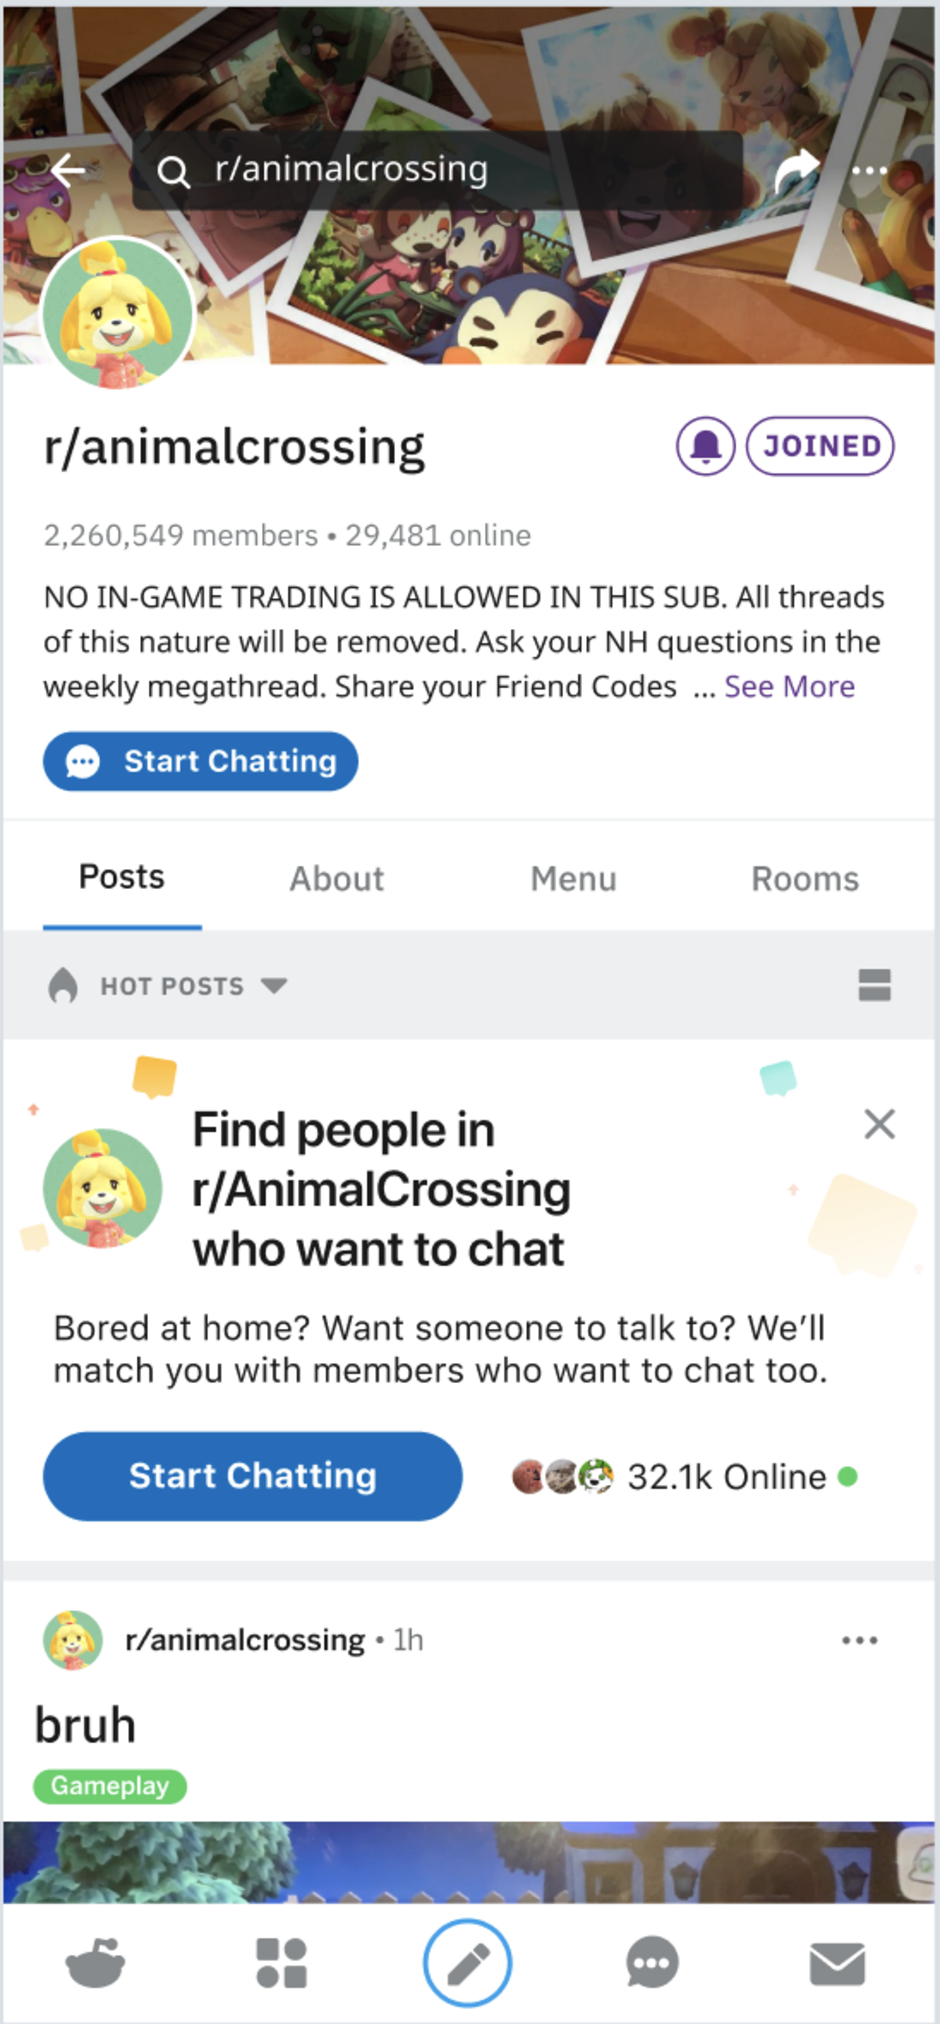 The new feature can be accessed via popular subreddits - Reddit introduces a new subreddit-based chat feature